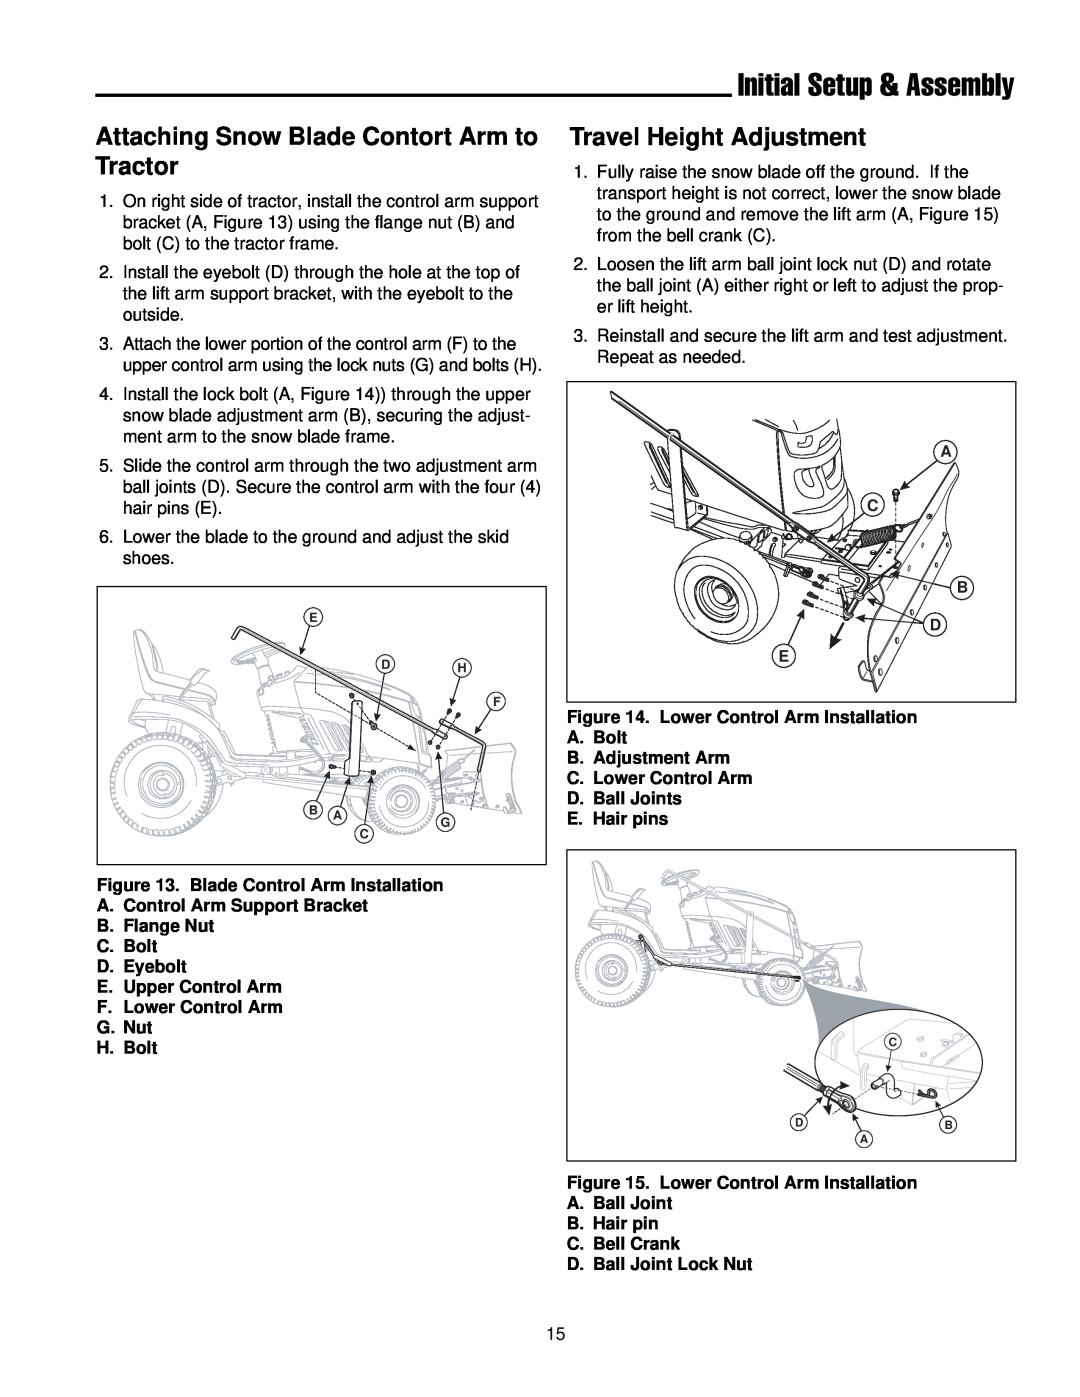 Briggs & Stratton 1694919 Attaching Snow Blade Contort Arm to Tractor, Travel Height Adjustment, Initial Setup & Assembly 